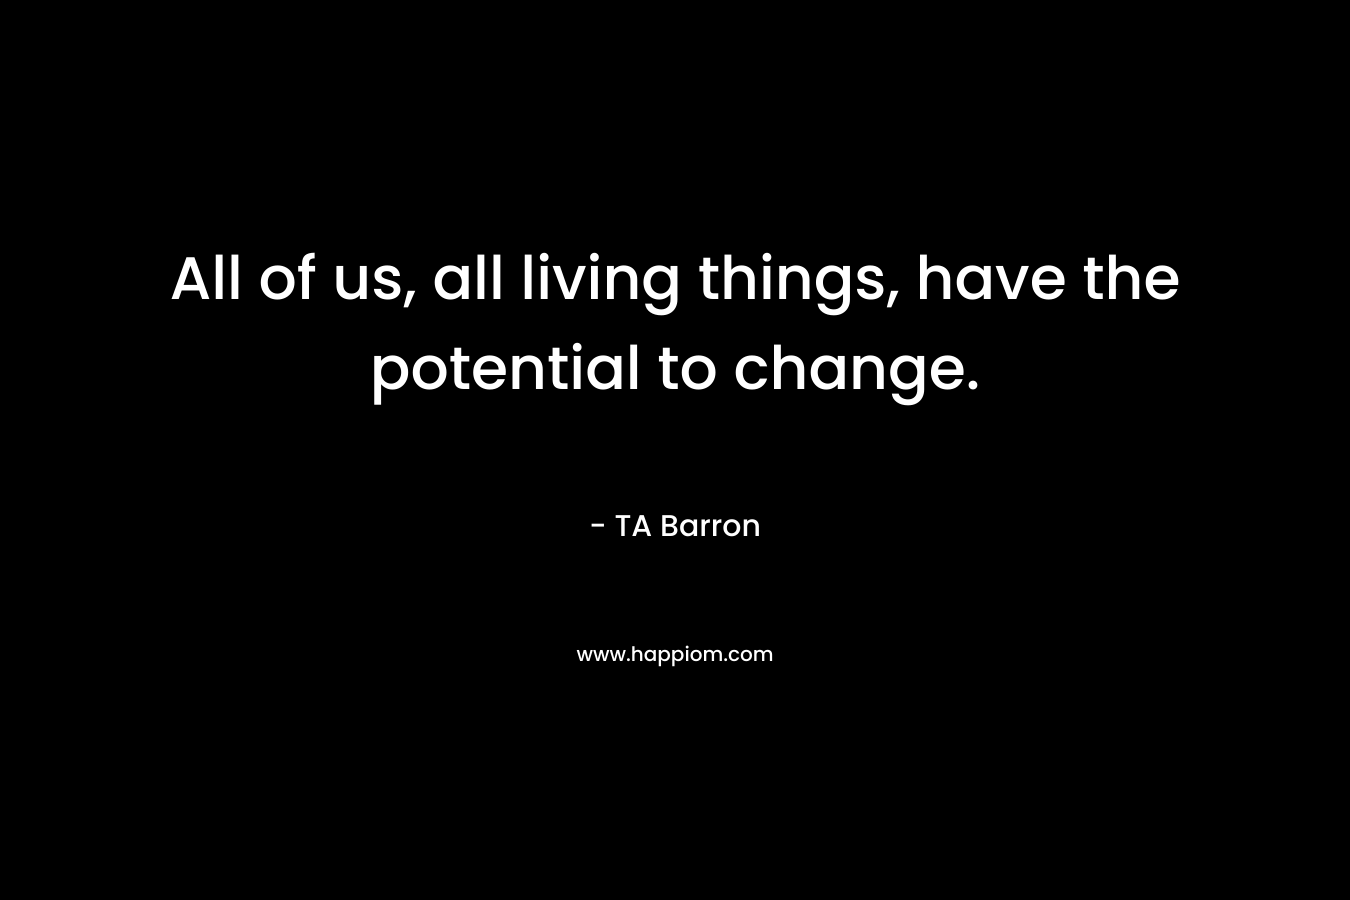 All of us, all living things, have the potential to change. – TA Barron